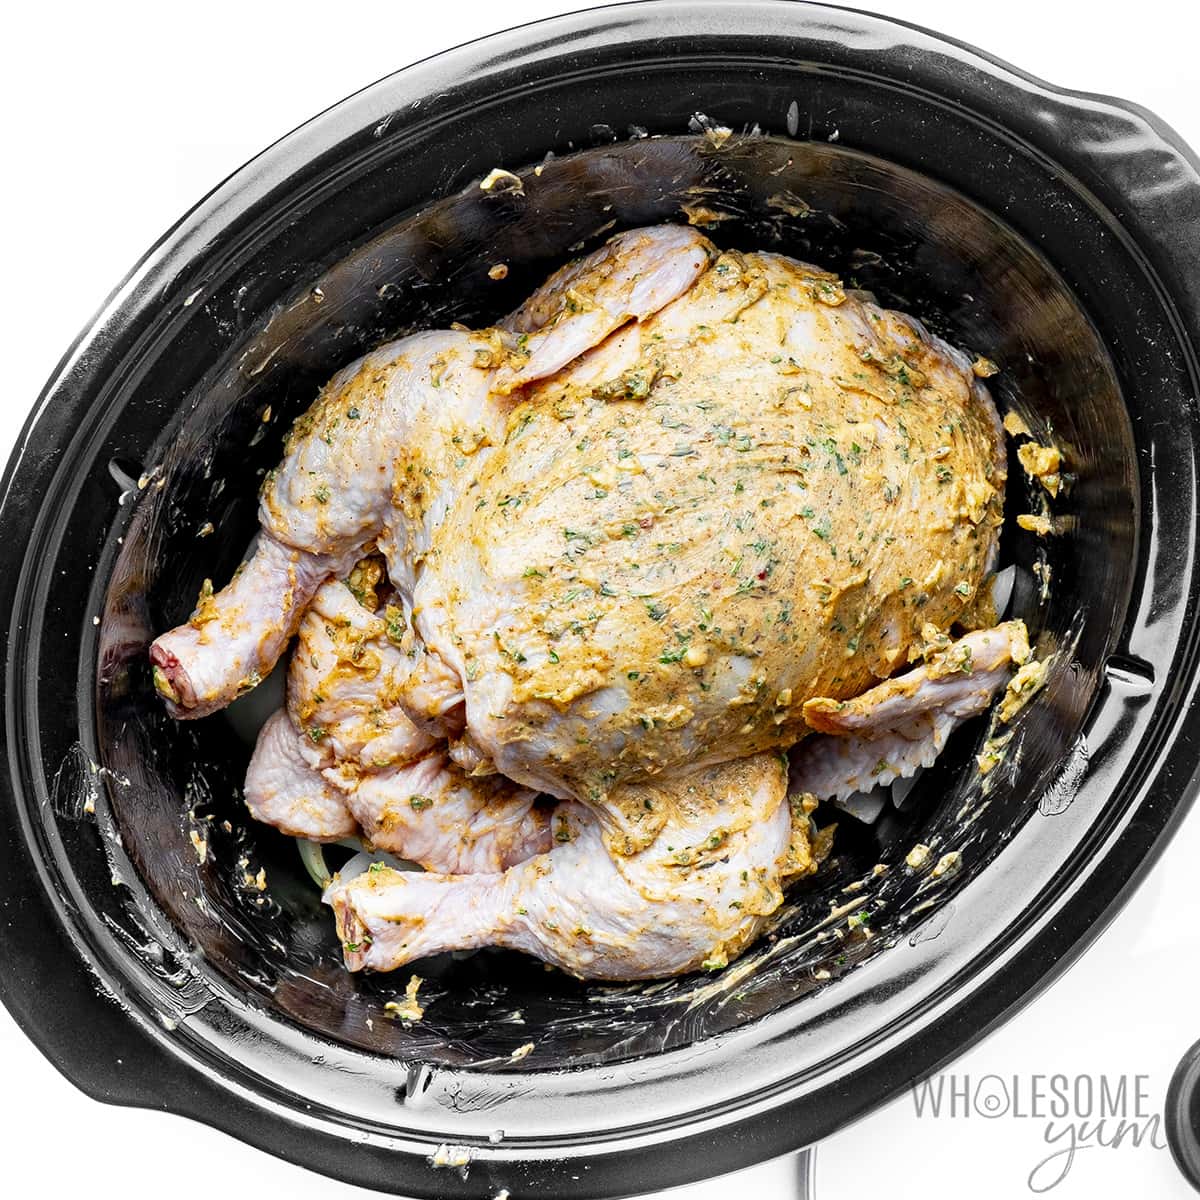 Butter mixture spread all over the whole chicken.